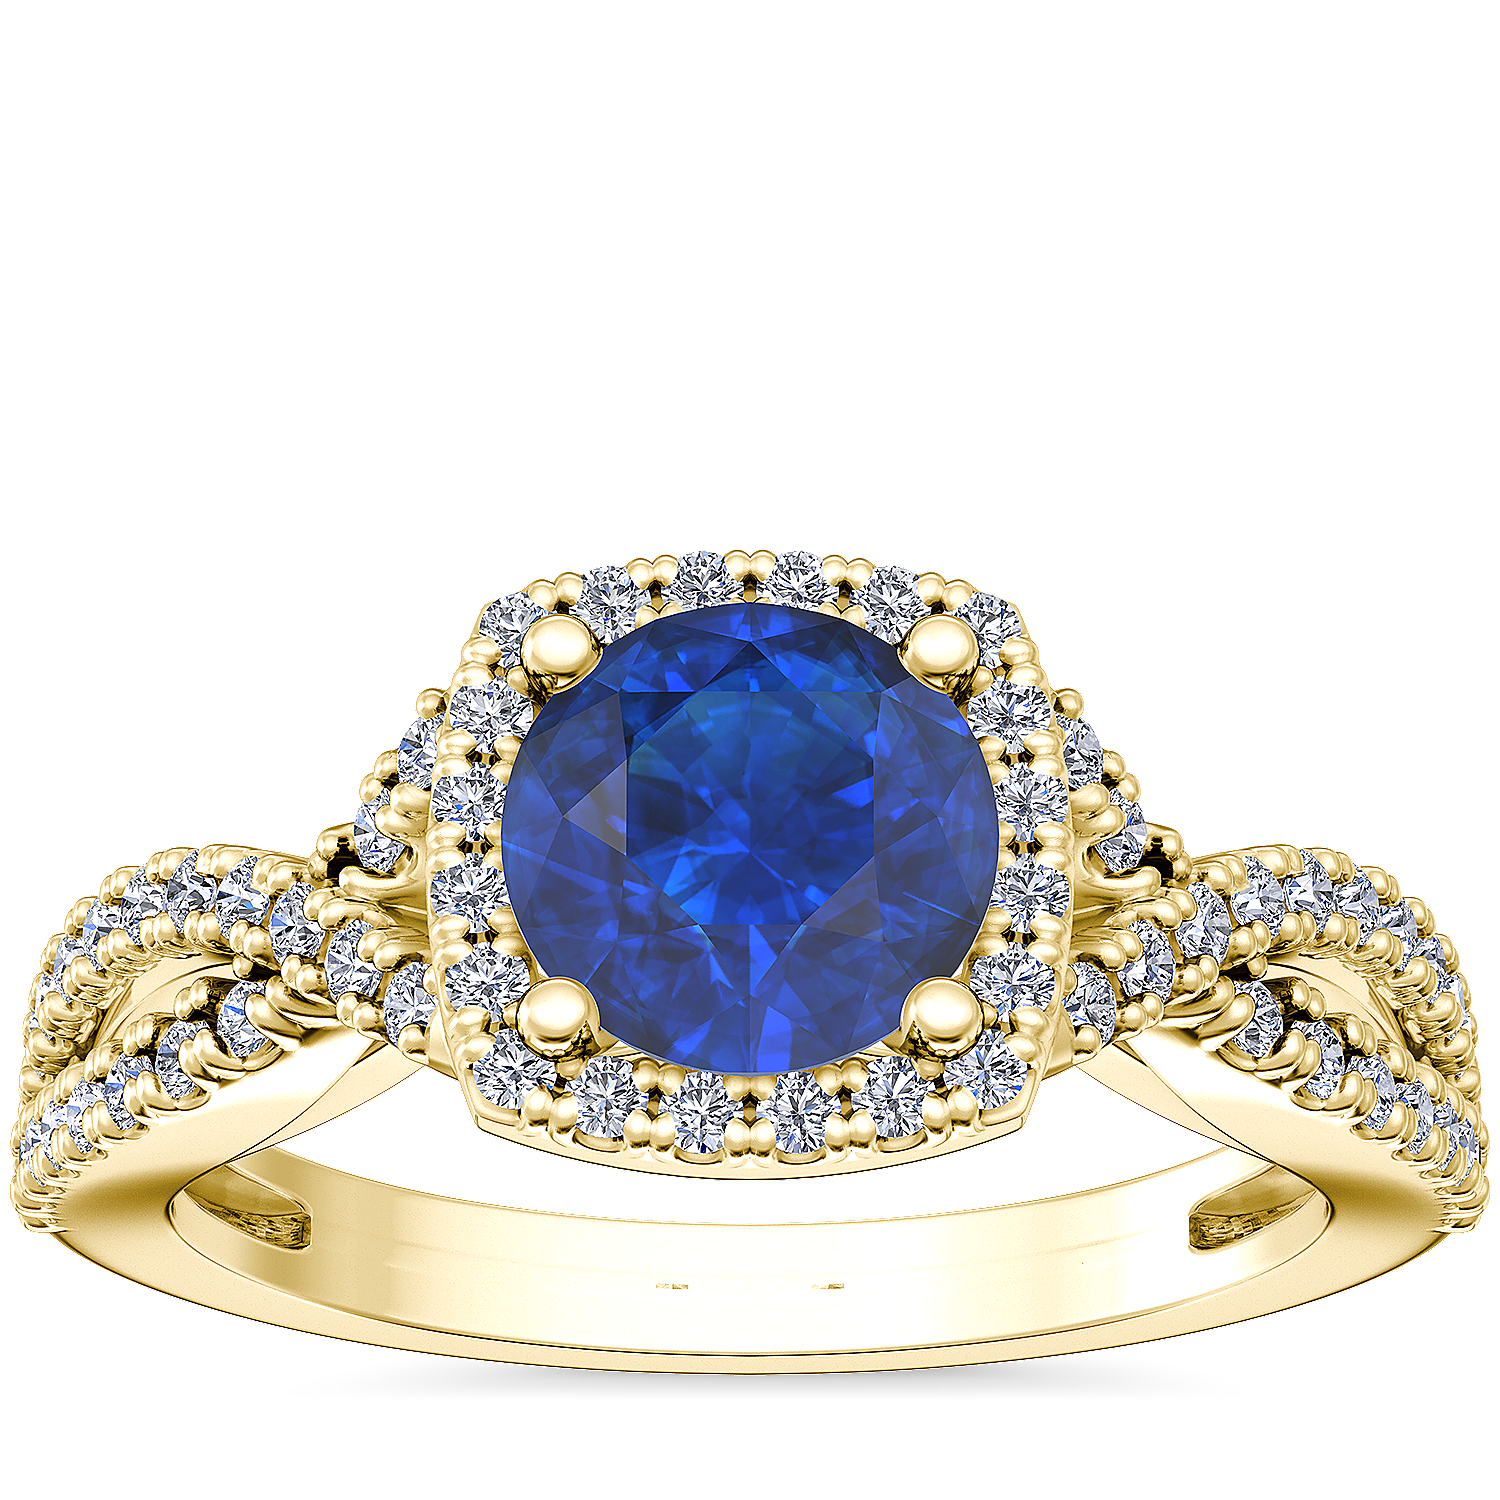 Twist Halo Diamond Engagement Ring with Round Sapphire in 14k Yellow Gold (8mm)